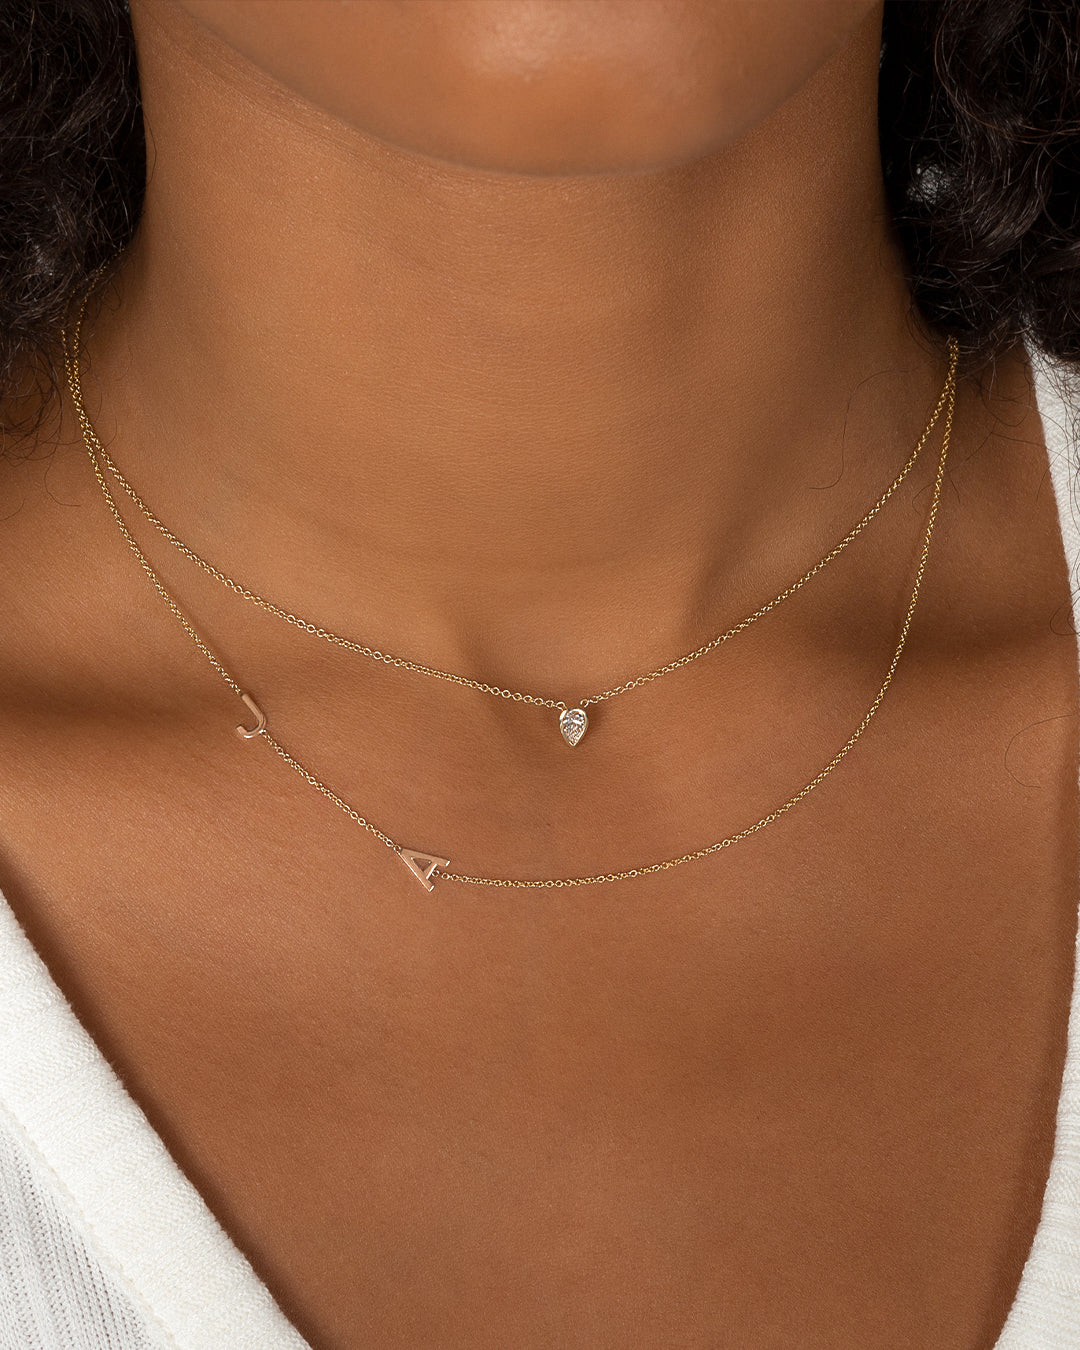 14k Gold Asymmetrical Multiple Initials Necklace